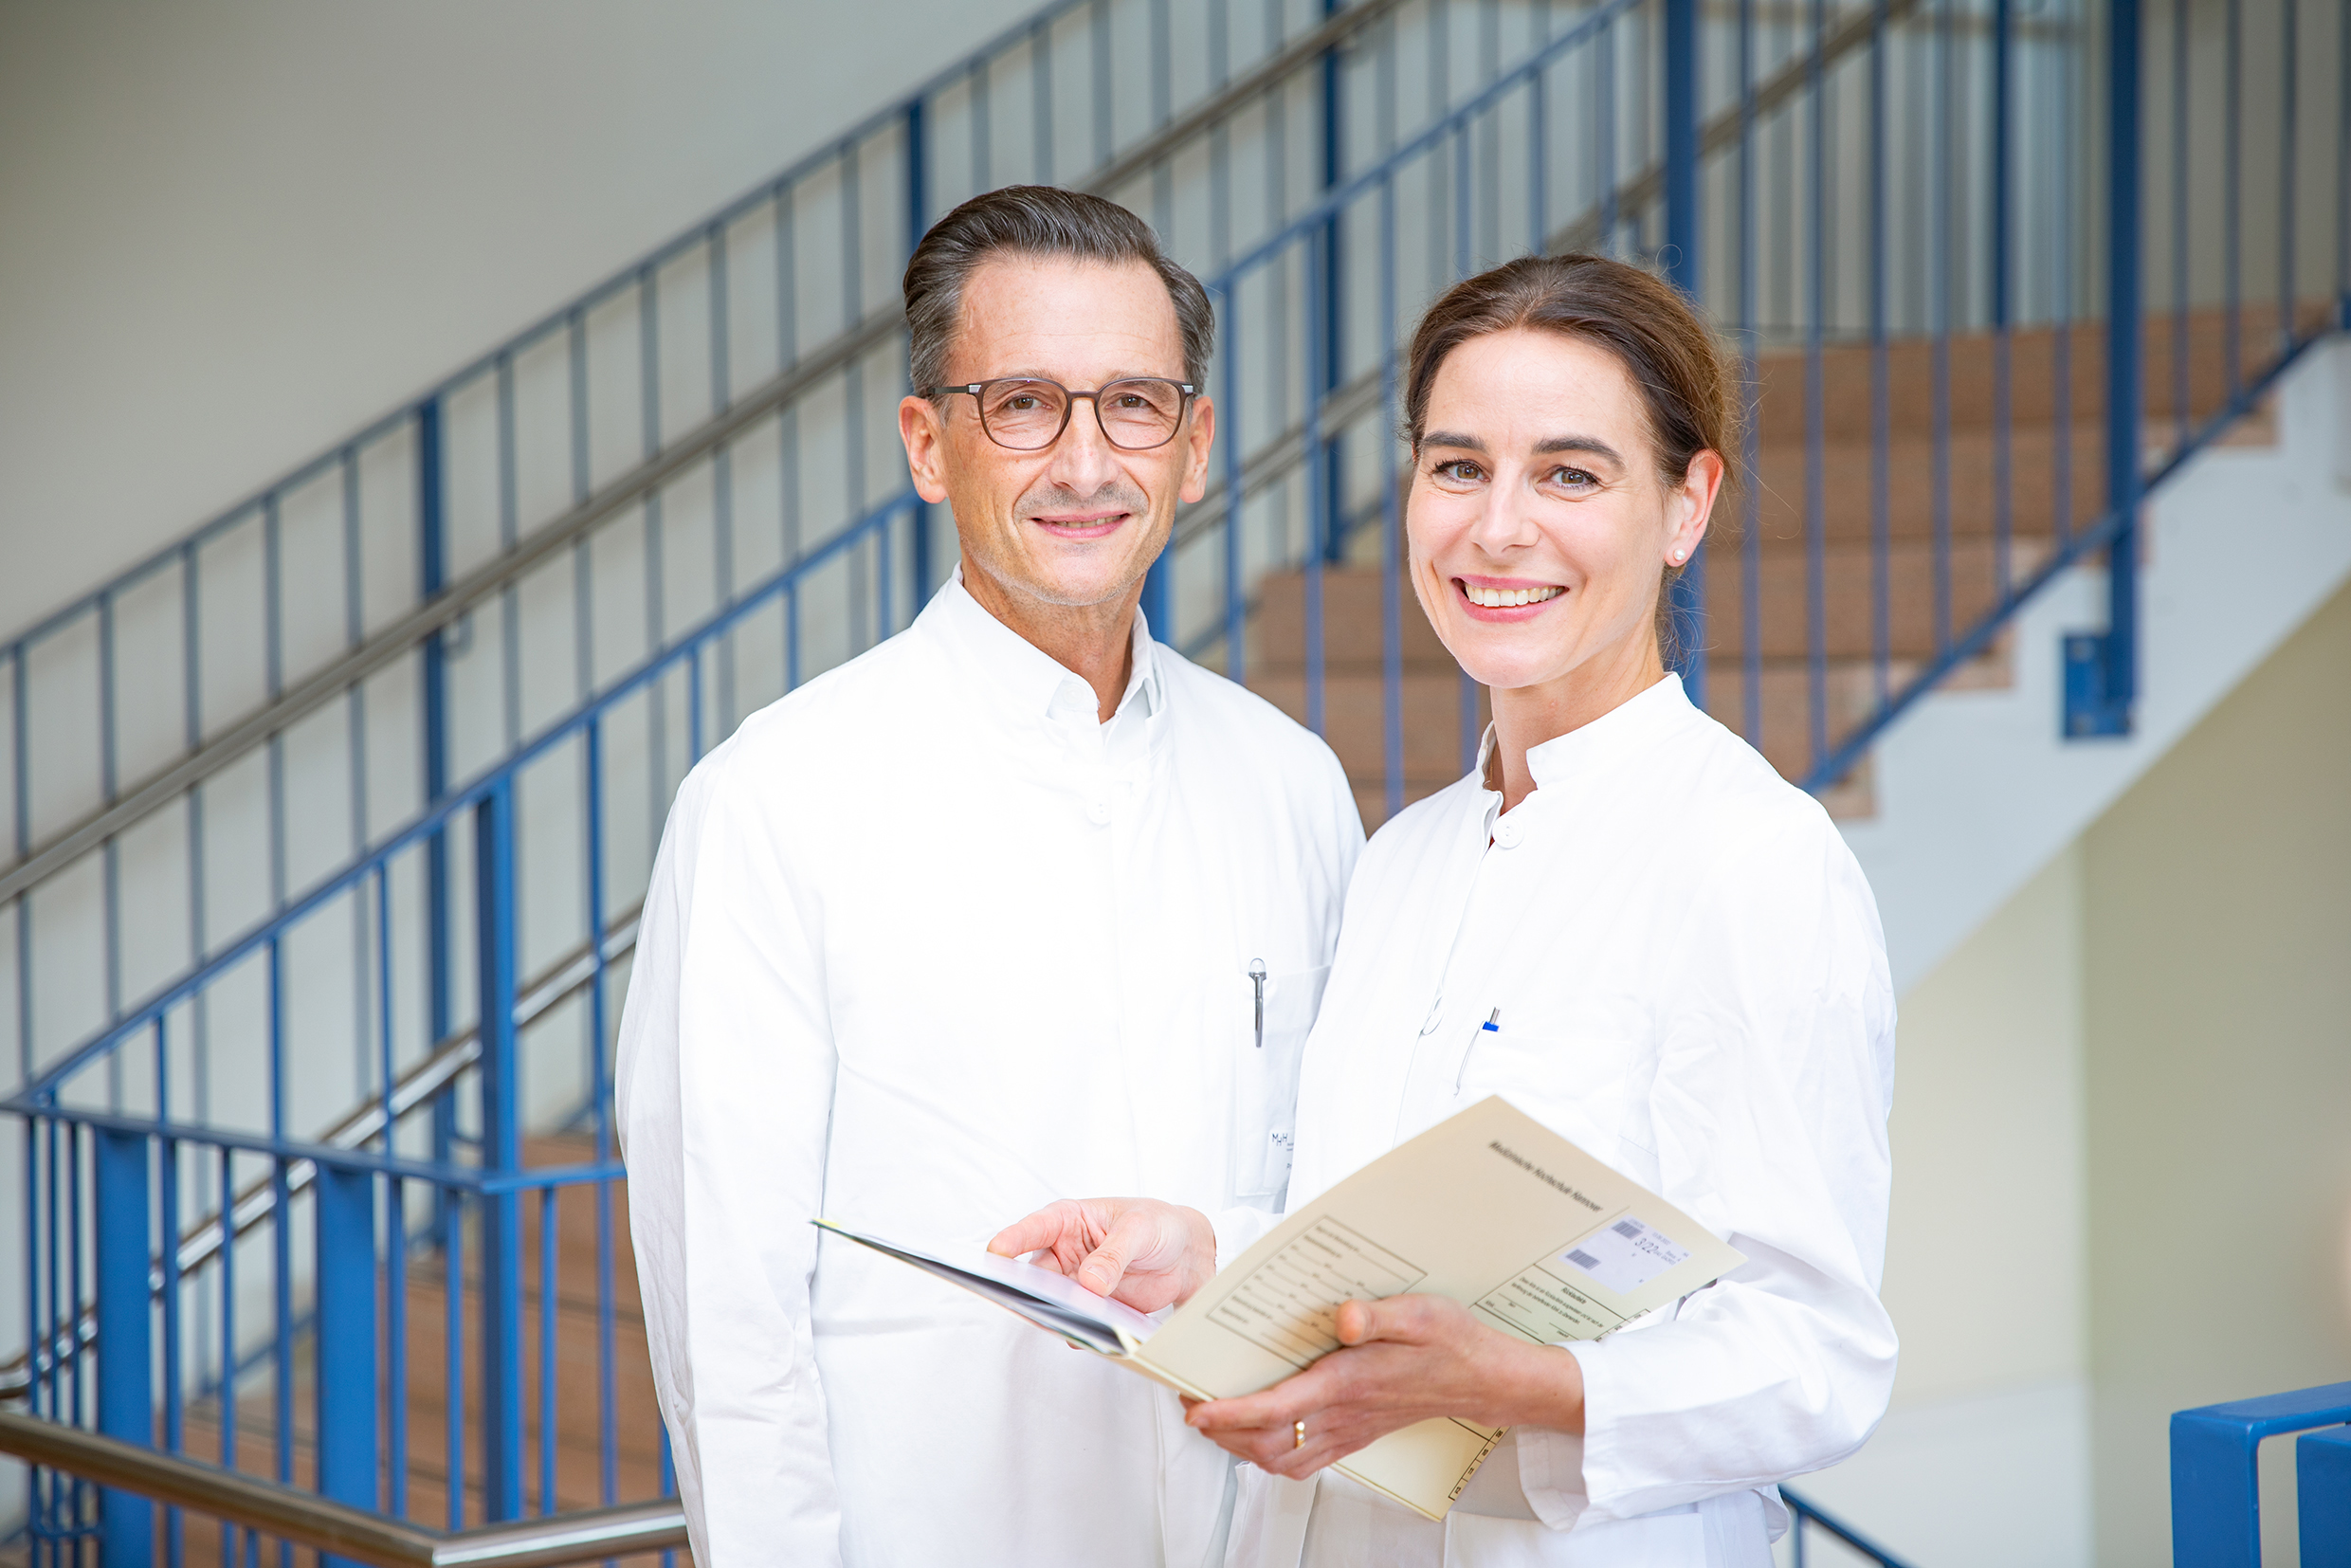 Professor Dr Arndt Vogel and private lecturer Dr Anna Saborowski standing together in the research department of the Department of Gastroenterology, Hepatology and Endocrinology.